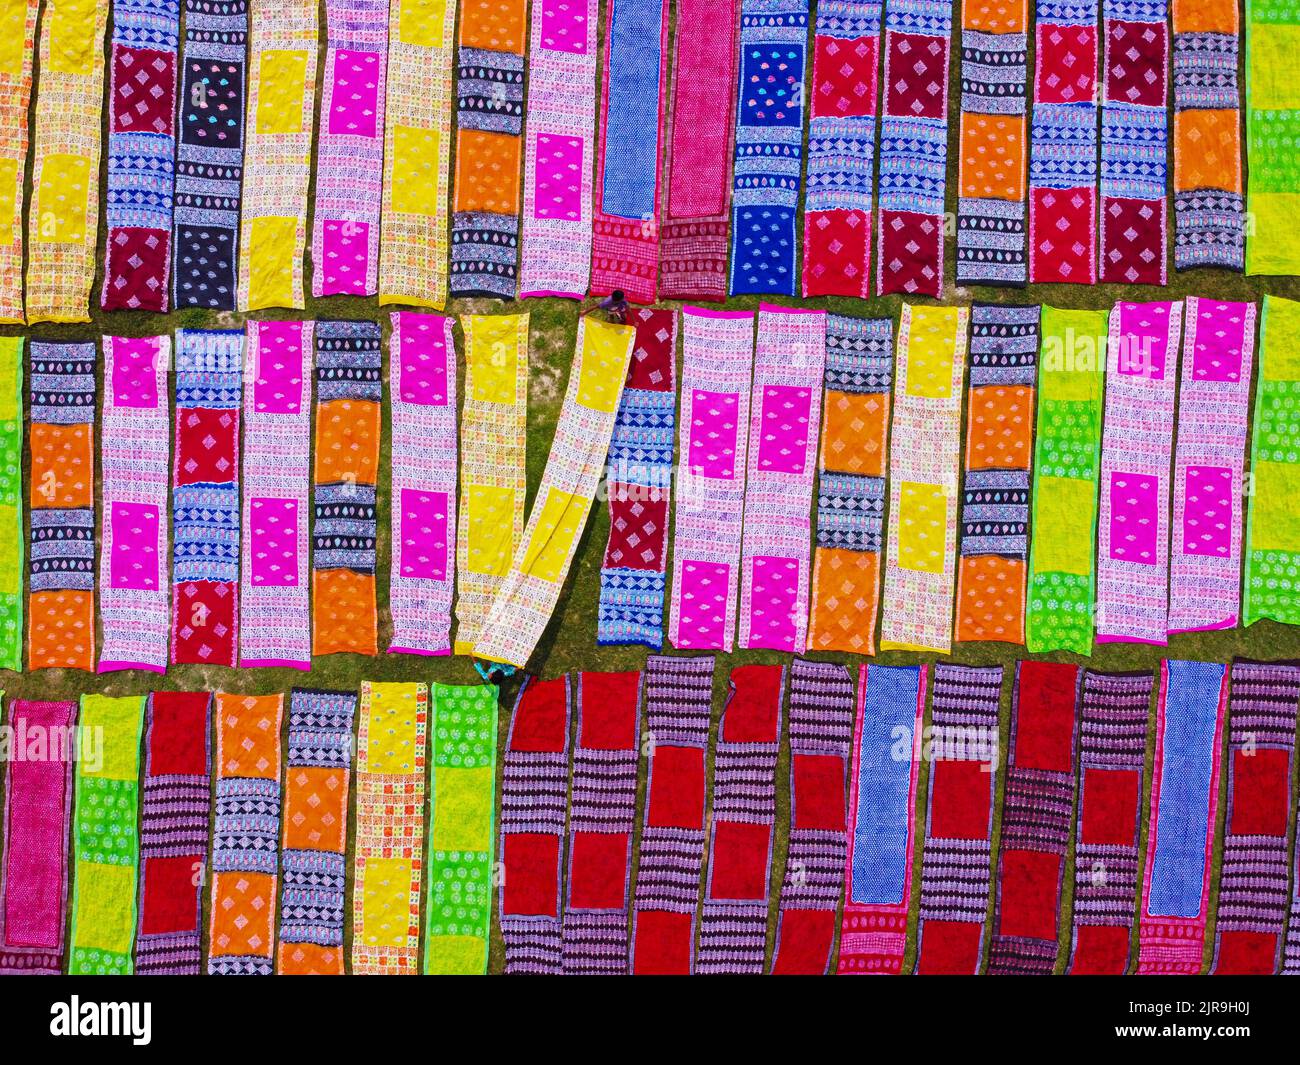 Narayanganj, Dhaka, Bangladesh. 23rd Aug, 2022. Colorful strips of fabric produce an eye-catching display as they are laid out in neat rows across a field in Narayanganj, Bangladesh. Locally called ''Saree'' - a traditional clothing garment for women, the long cotton cloths are set out to dry under the hot sun, having been dyed with bright colours. About 4000 pieces of cloth are laid to dry here everyday. The process usually takes three hours, with each set of 200 pieces at a time to dry in temperatures that can reach over 36 degrees celsius. Credit: ZUMA Press, Inc./Alamy Live News Stock Photo